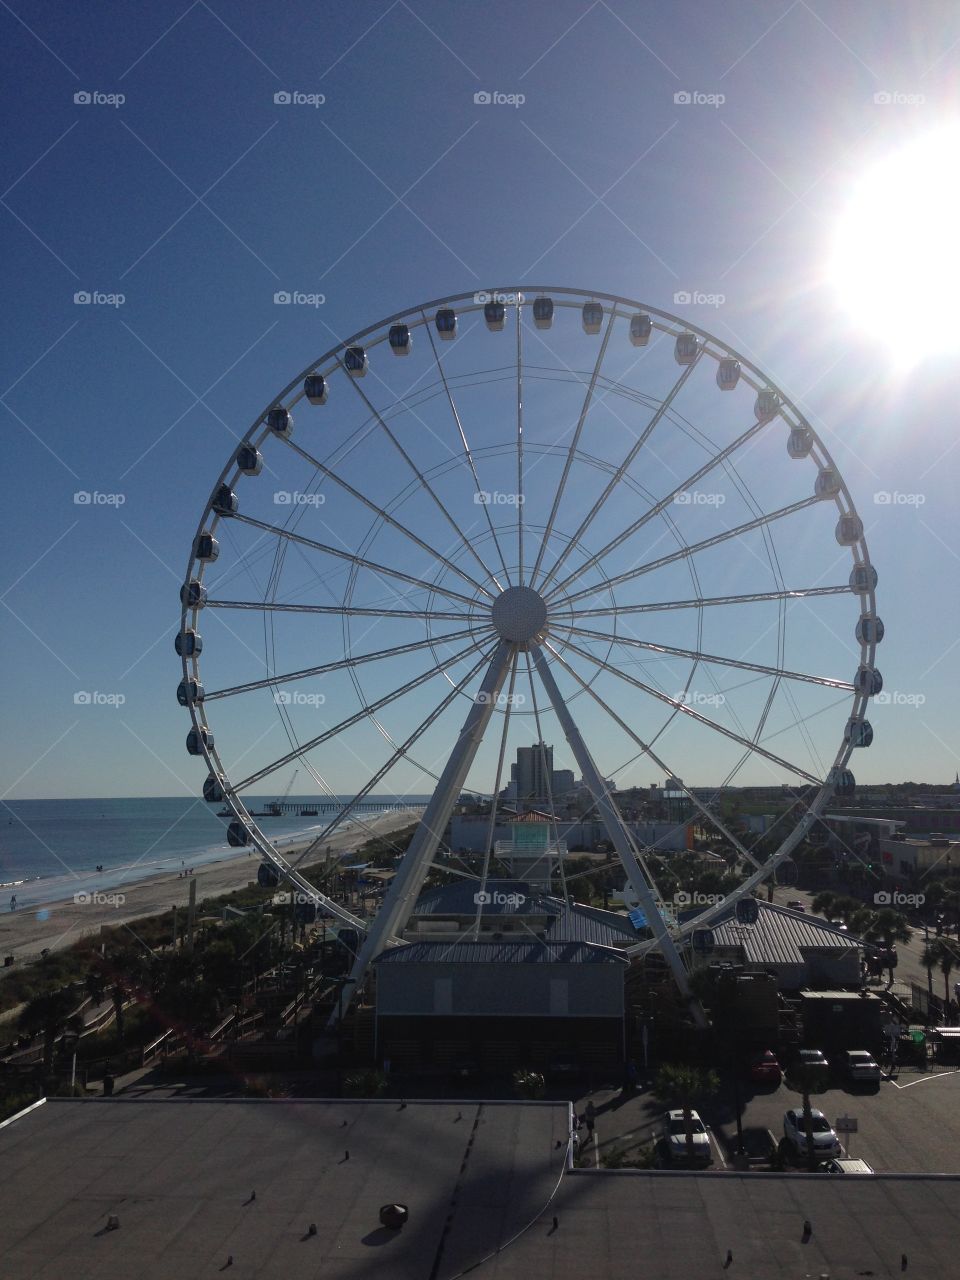 Big wheel. Sky wheel in Myrtle beach South Carolina at night and a great ride